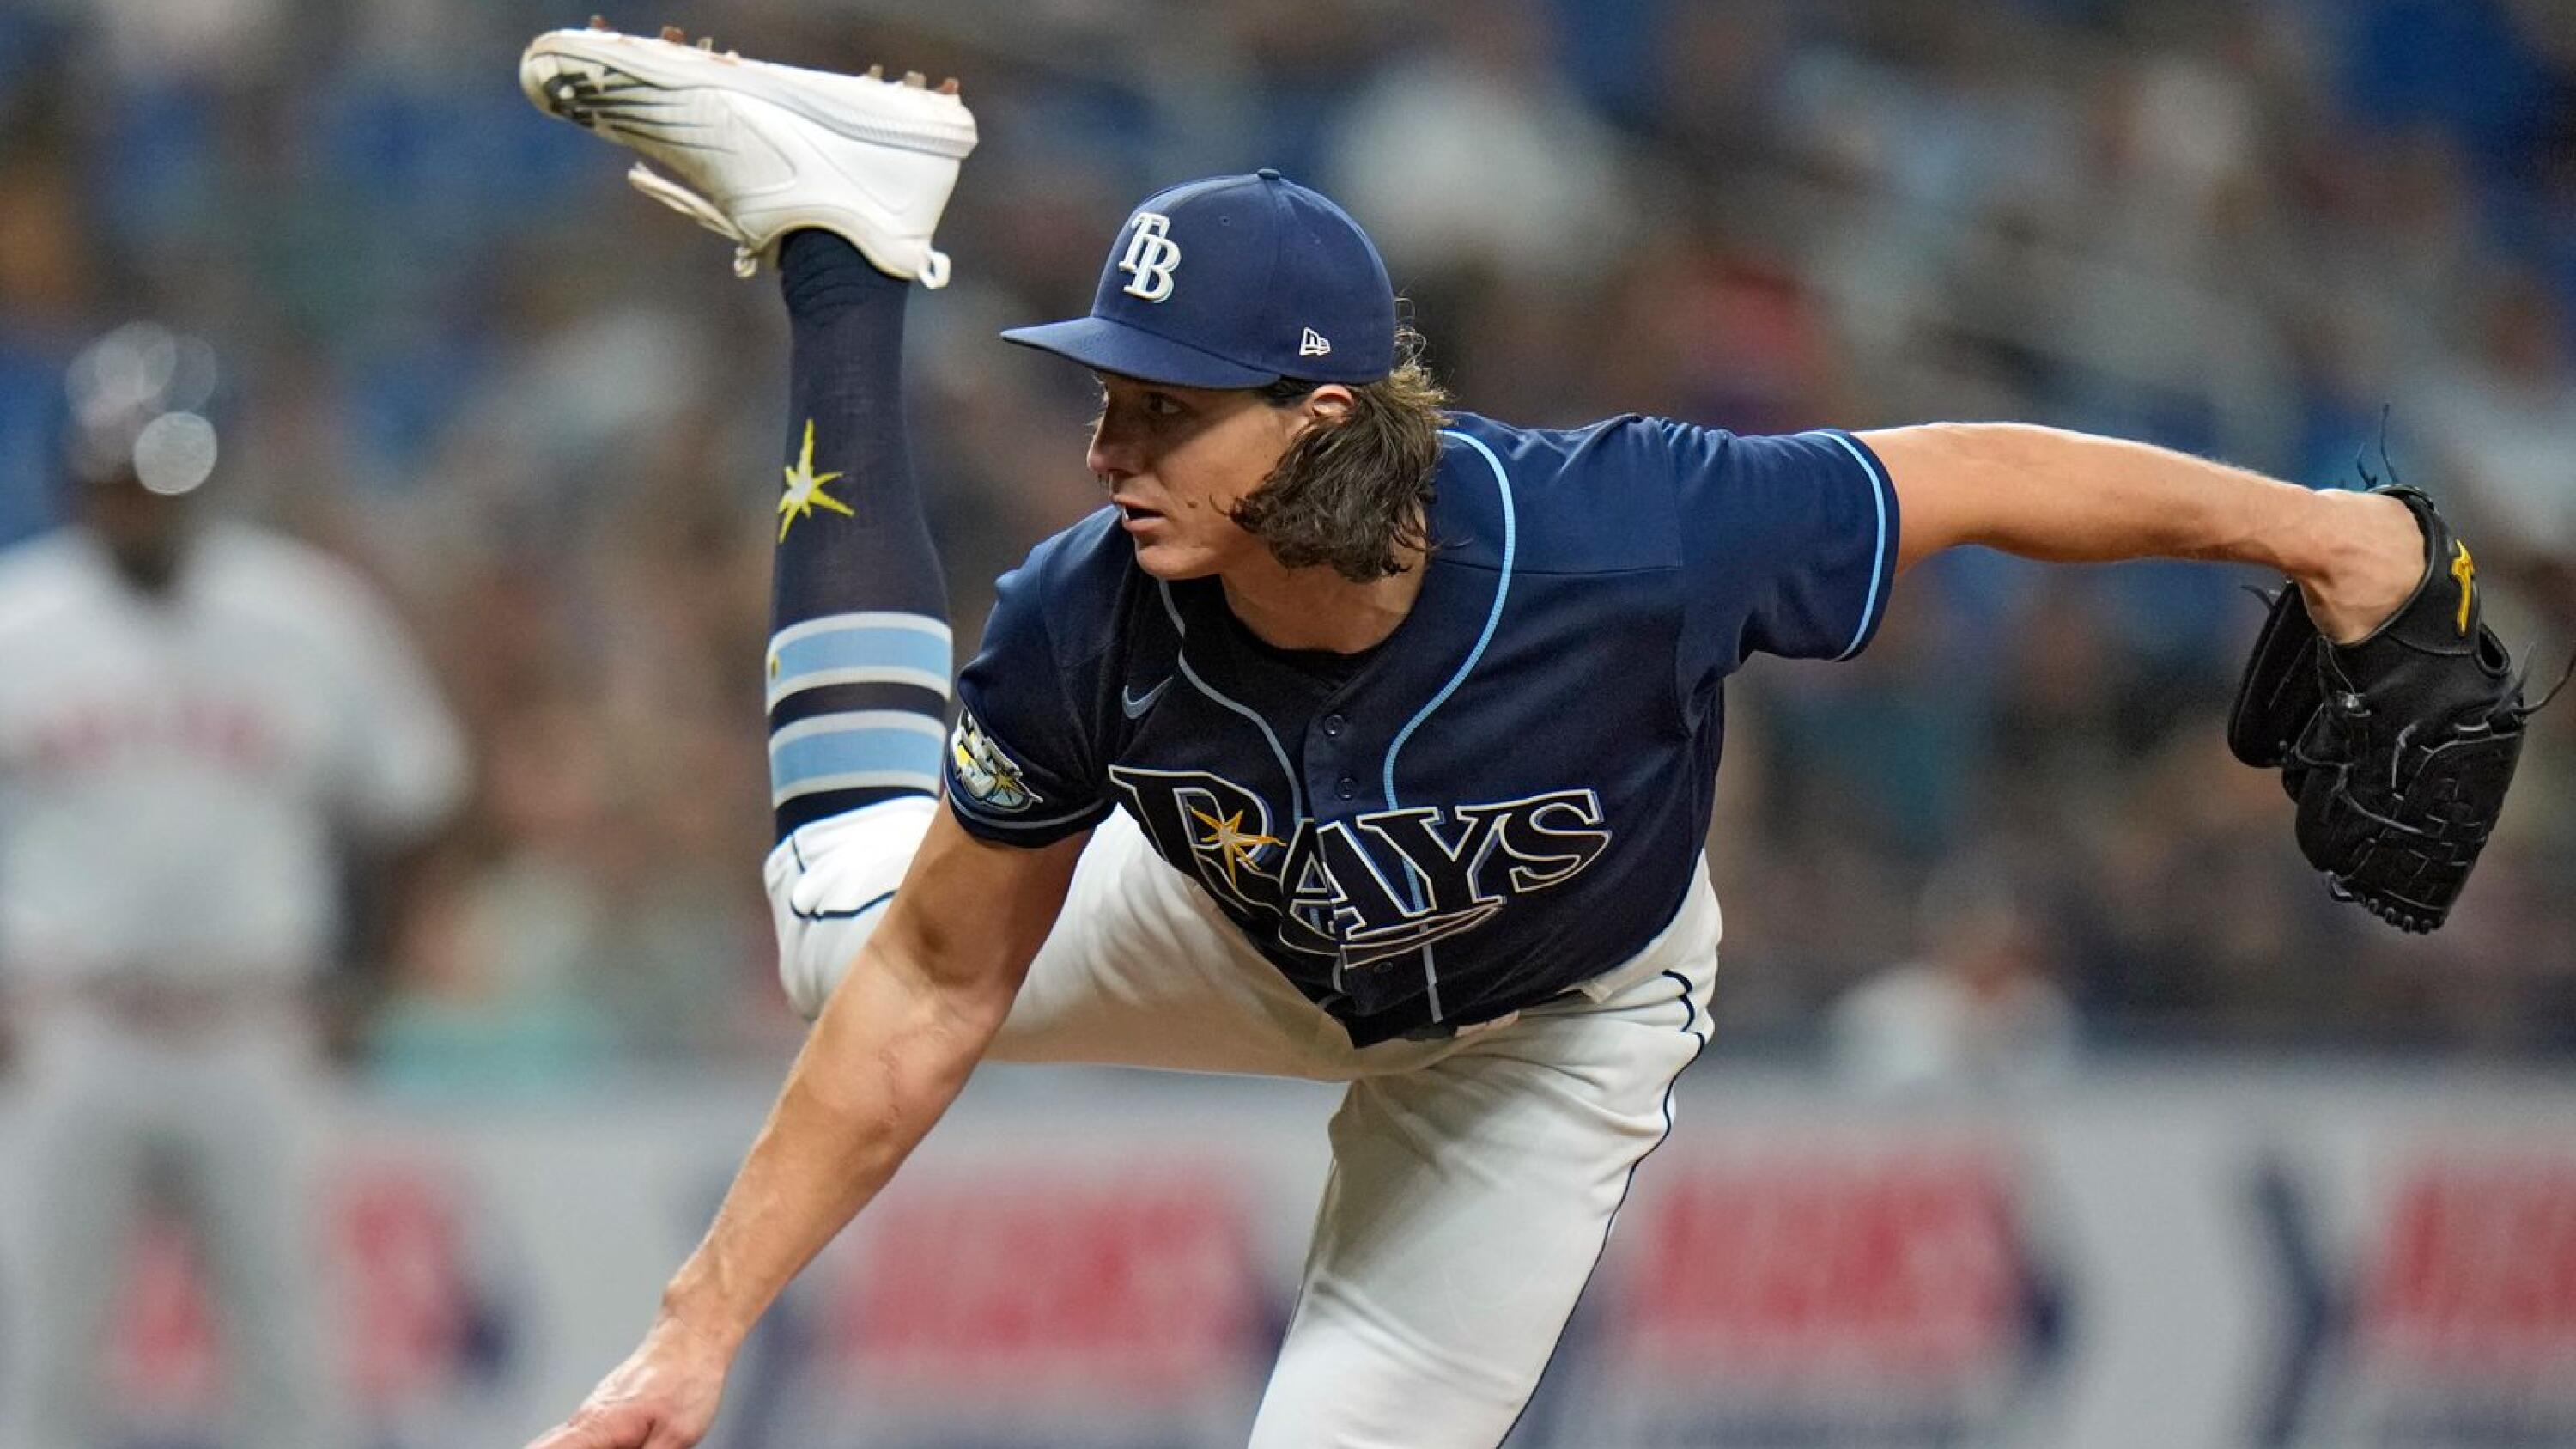 Glasnow ties career high with 14 strikeouts as Rays continue home